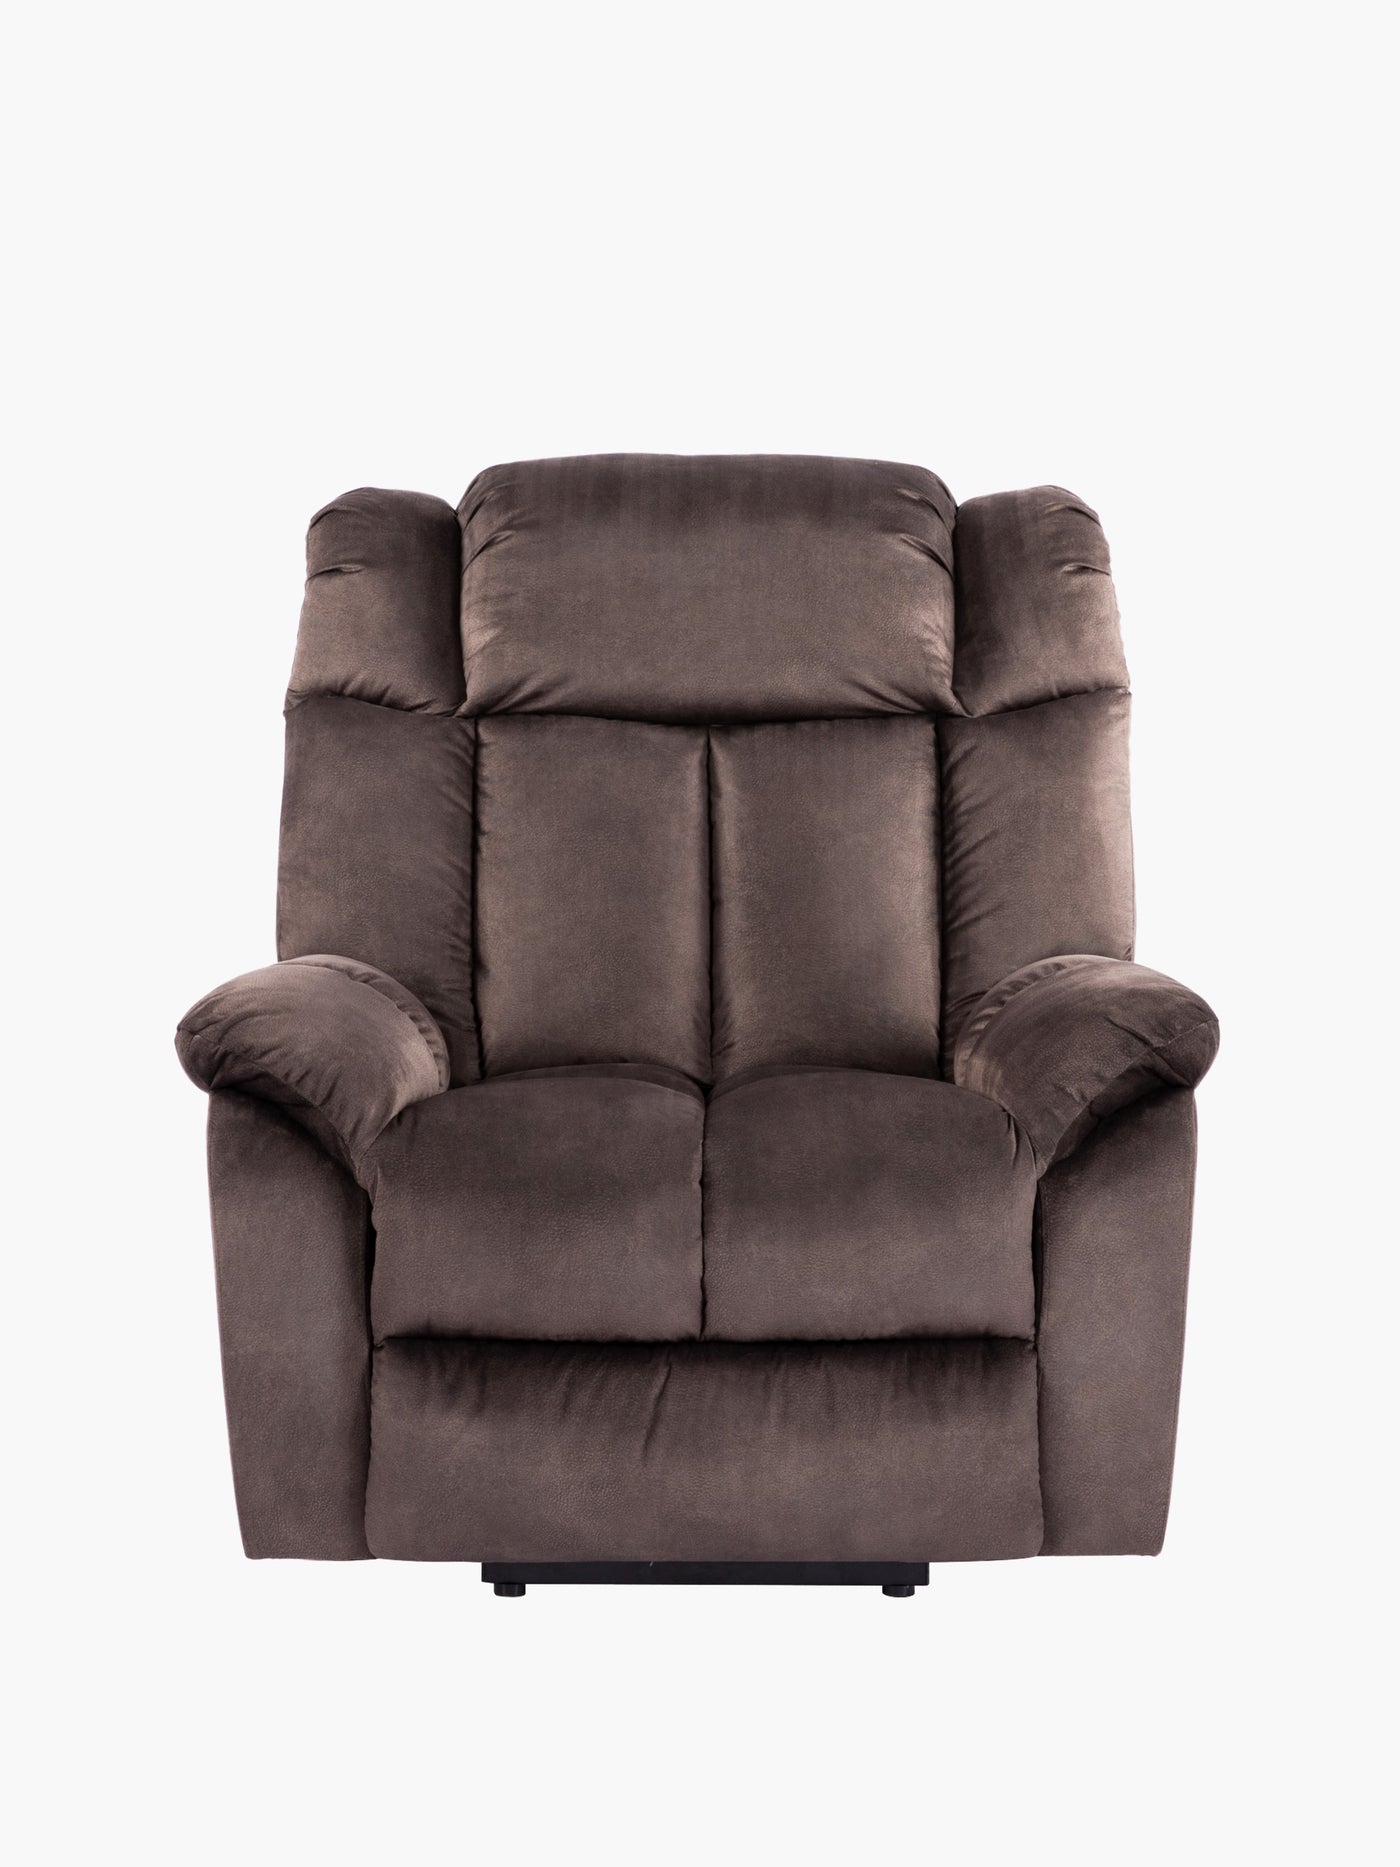 COLAMY Electric Power Lift Recliner Chair Sofa for Elderly CL8233 Chocolate #color_chocolate